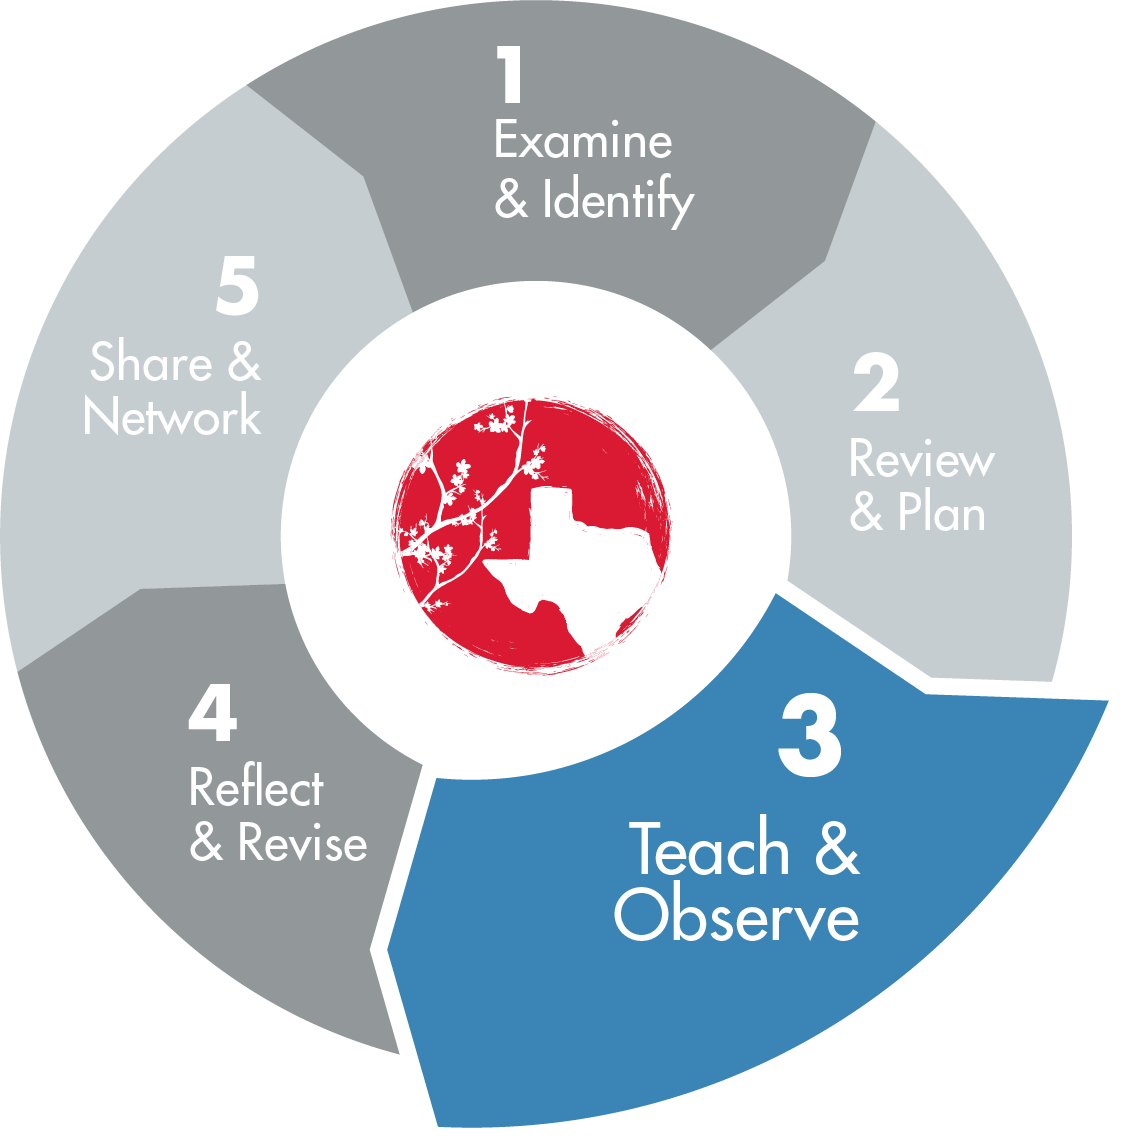 TEXAS LESSON STUDY  5 PHASES - 1. Examine & Identify, 2. Review & Plan, 3. Teach & Observe, 4. Reflect & Revise and 5. Share & Network,  where phase 3 is visually selected